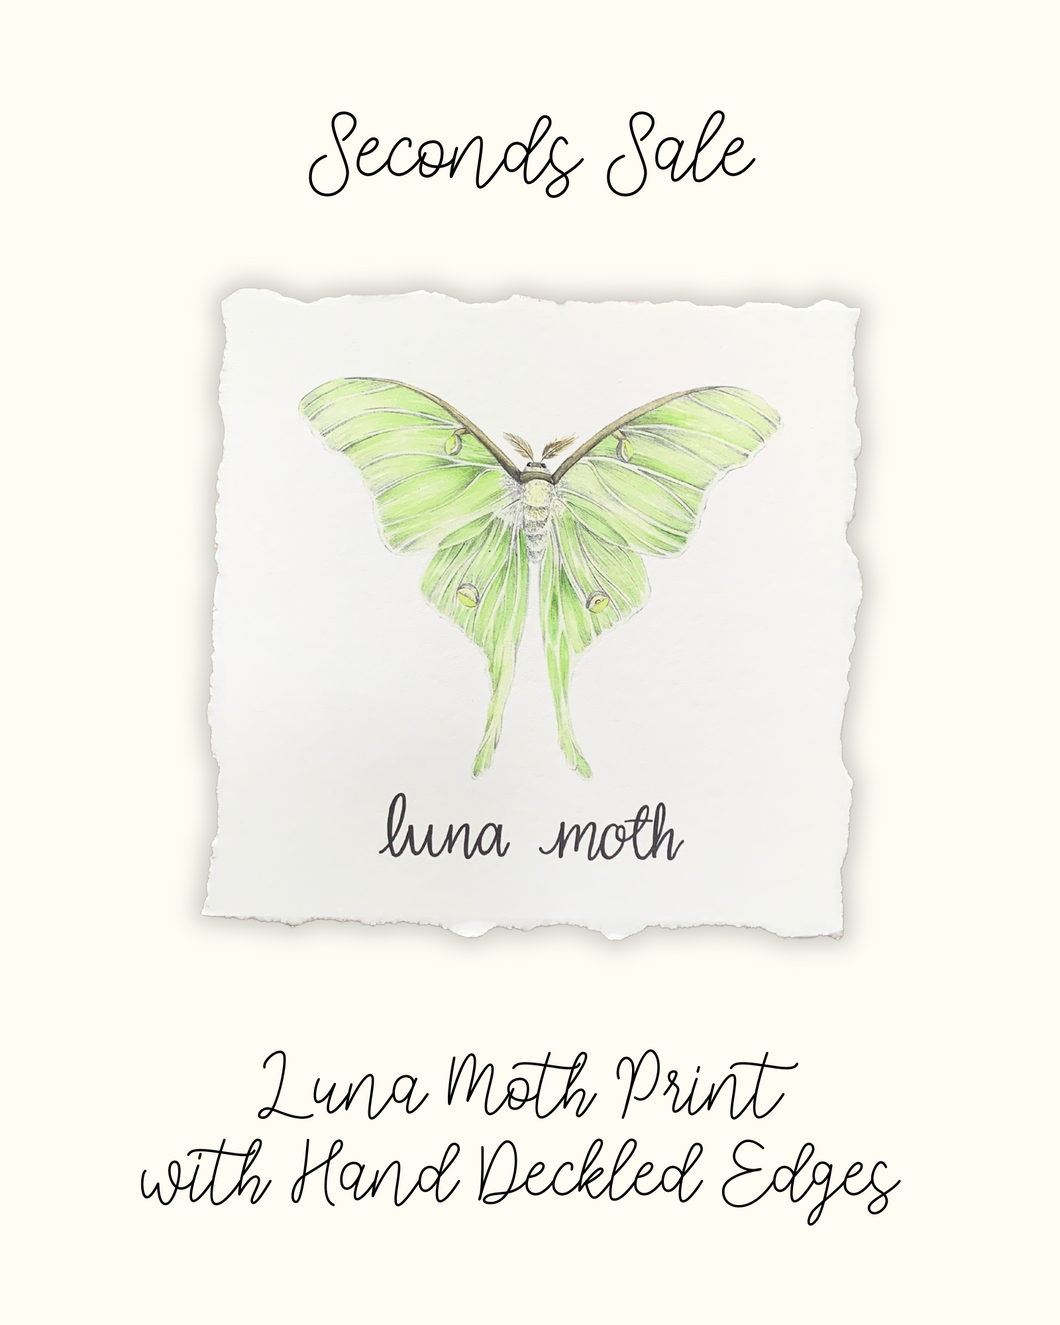 Luna Moth Print with Hand Deckled Edge - Seconds Sale